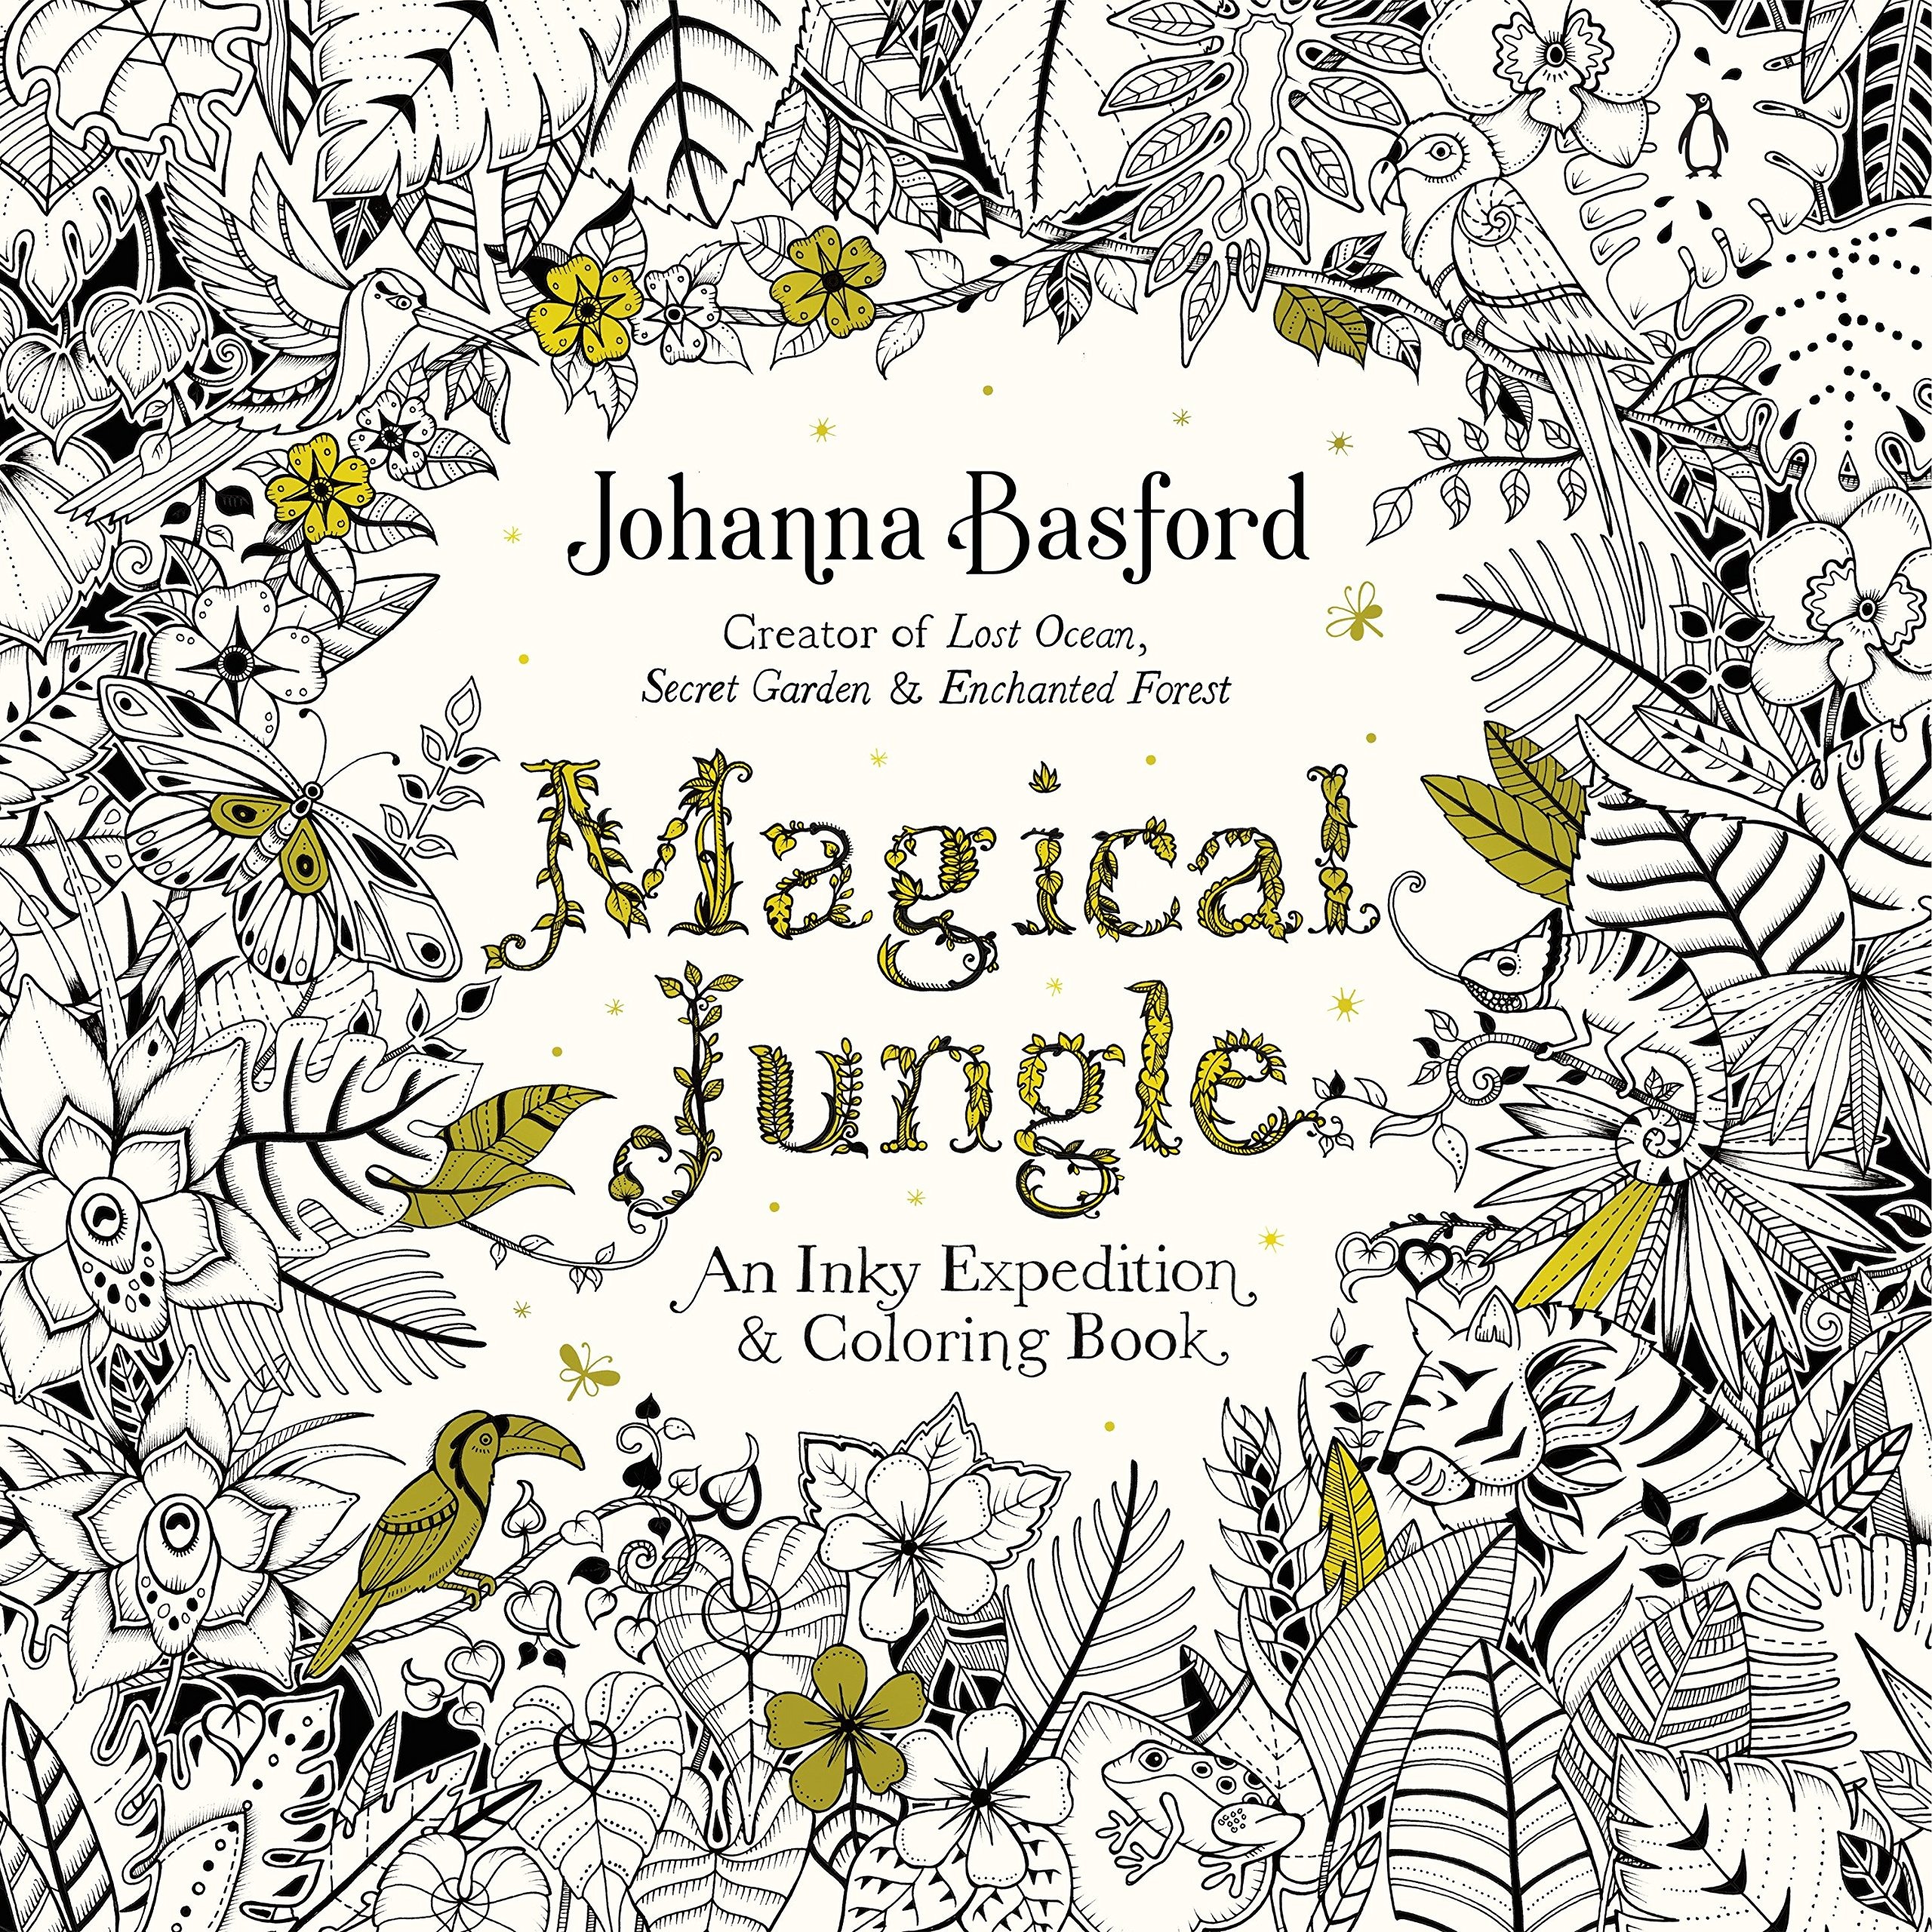 Adult Coloring Book: Magical Jungle: An Inky Expedition and Coloring Book for Adults for $7.90 (53% off) at Amazon